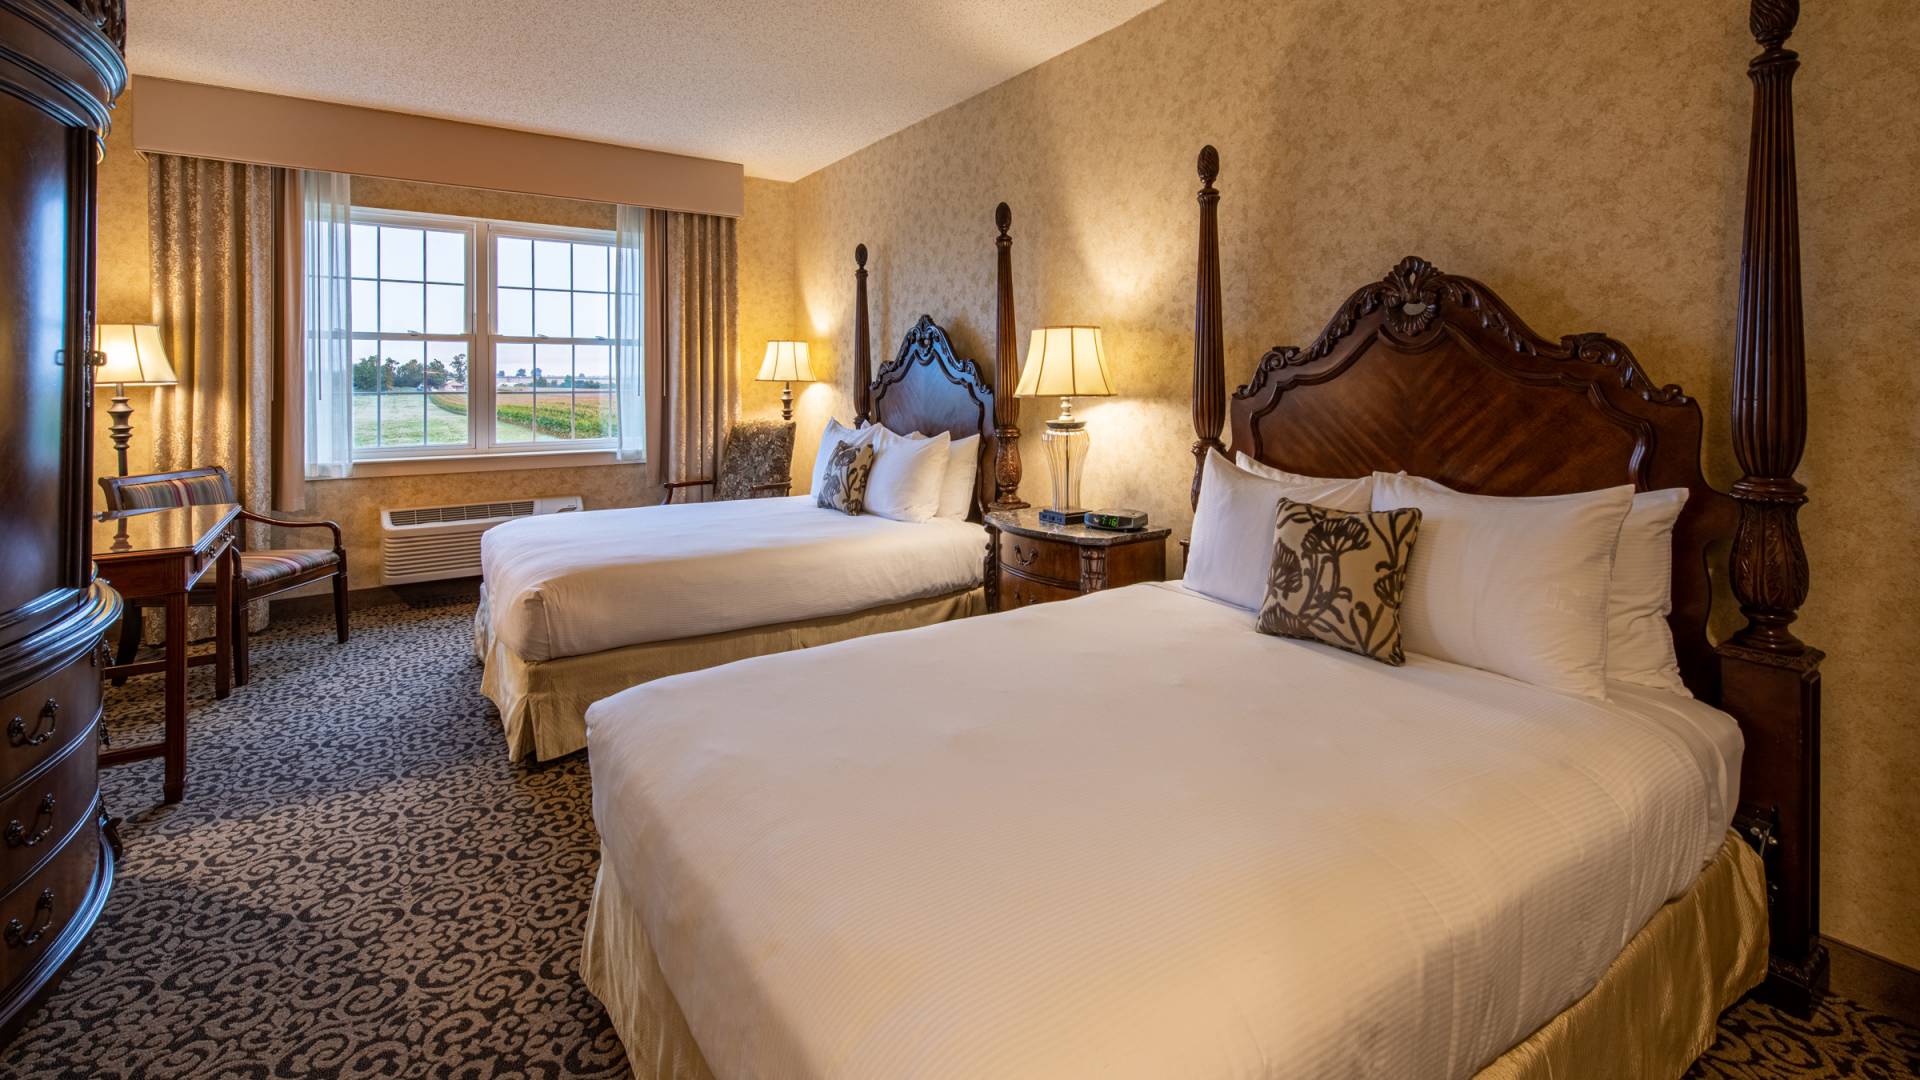 Double Queen Room at AmishView Inn & Suites in Lancaster County